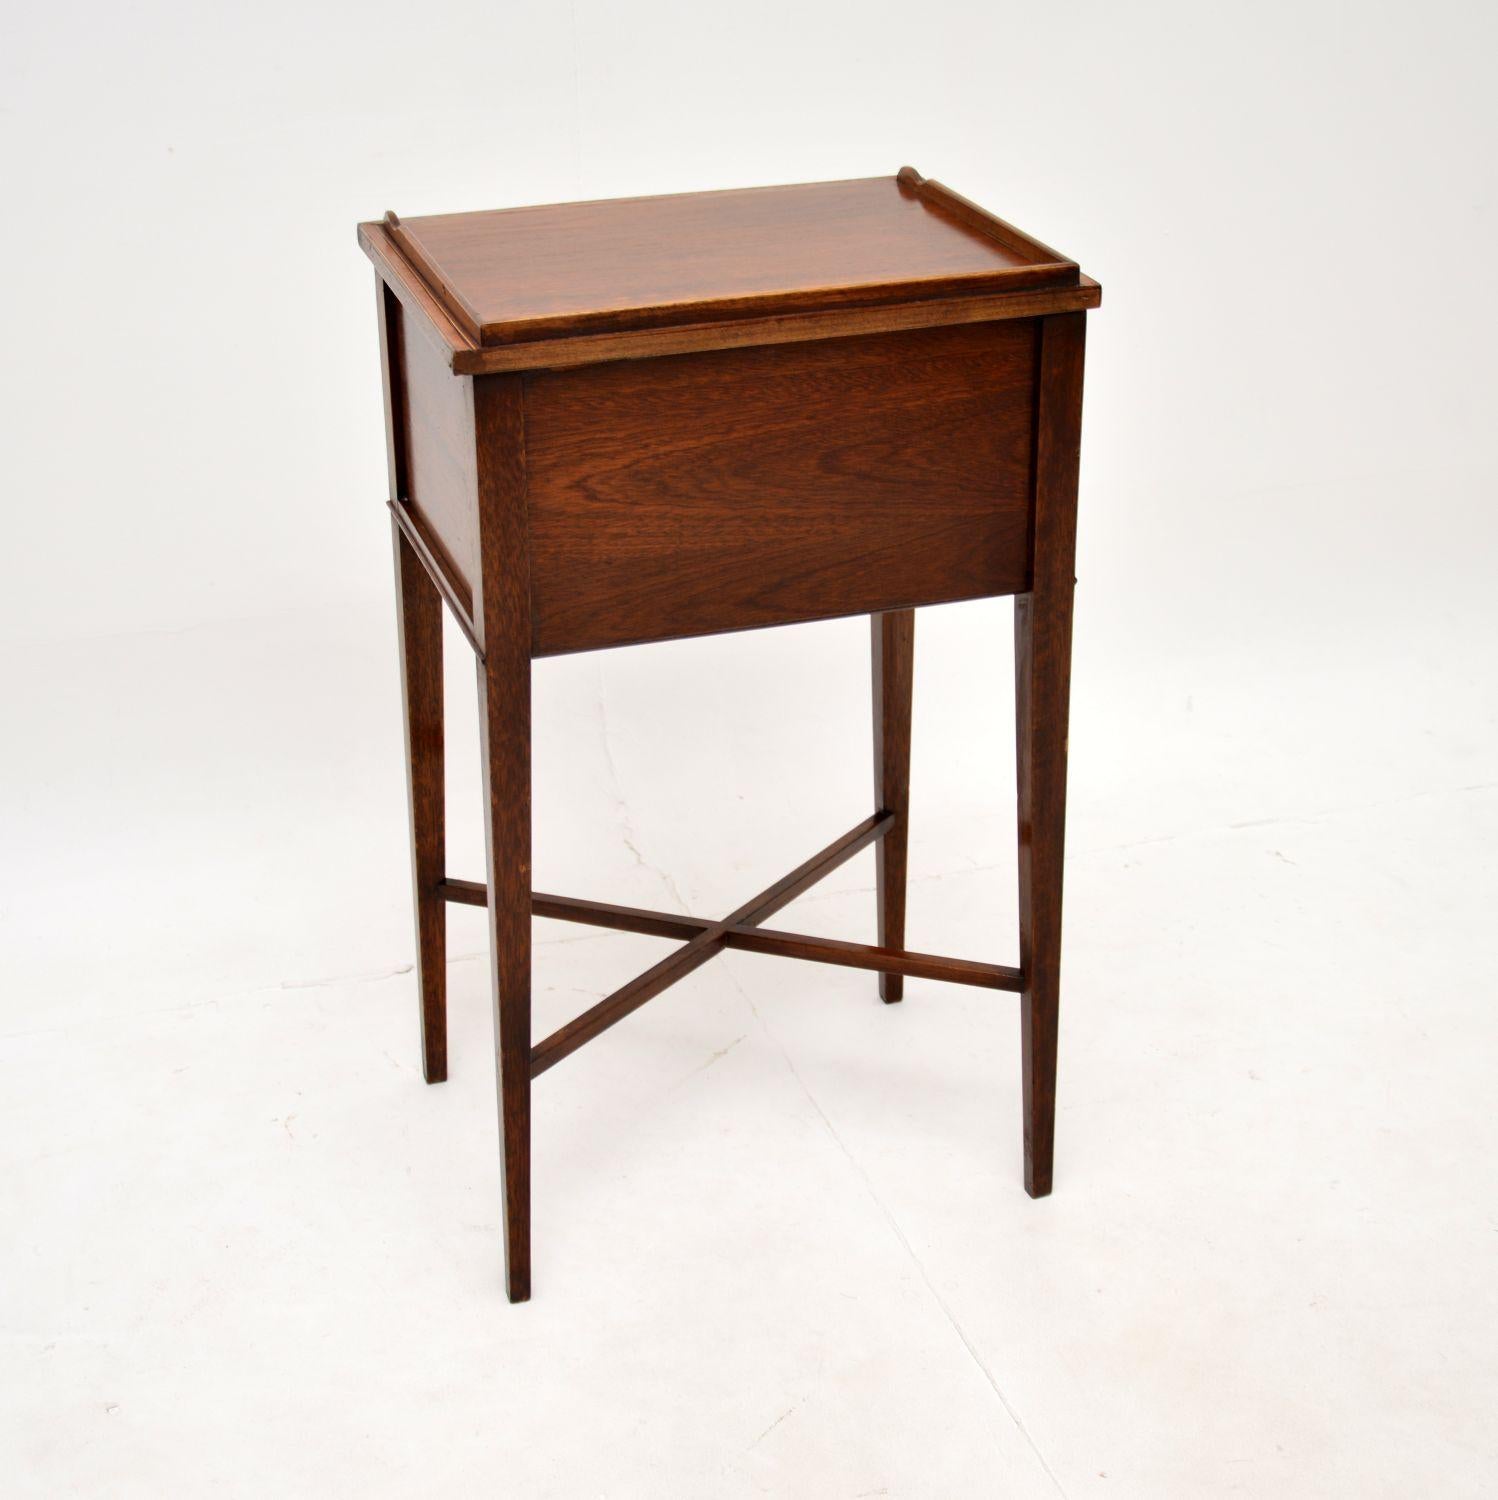 Early 20th Century Antique Edwardian Inlaid Side Table